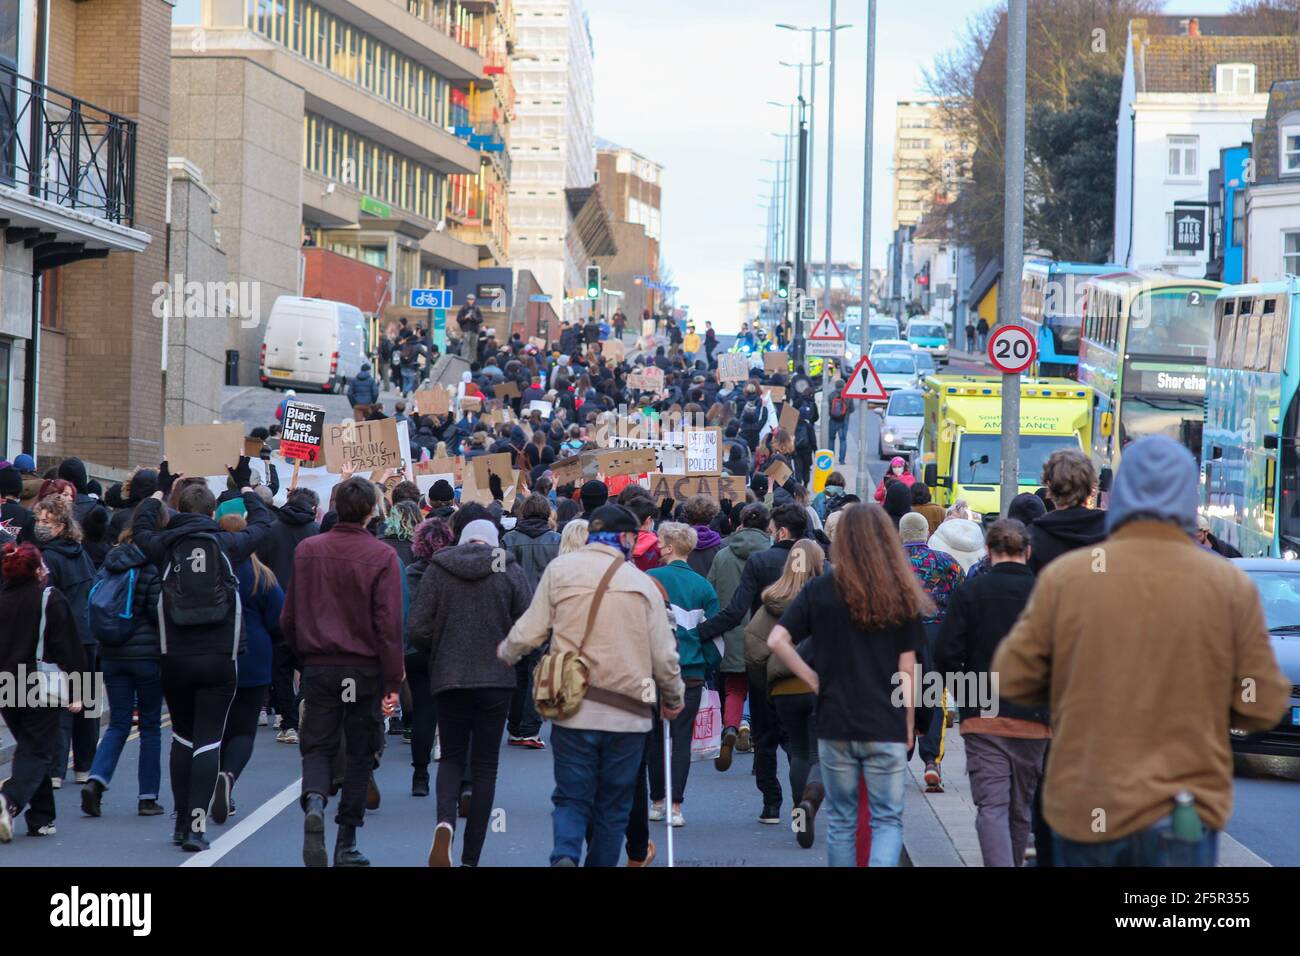 Brighton, UK. 27th Mar, 2021. Protesters gathered in Brighton this evening in protest against the new Police, Crime and courts bill. They then marched onto Brighton police station. Credit: Pete Abel/Alamy Live News Stock Photo